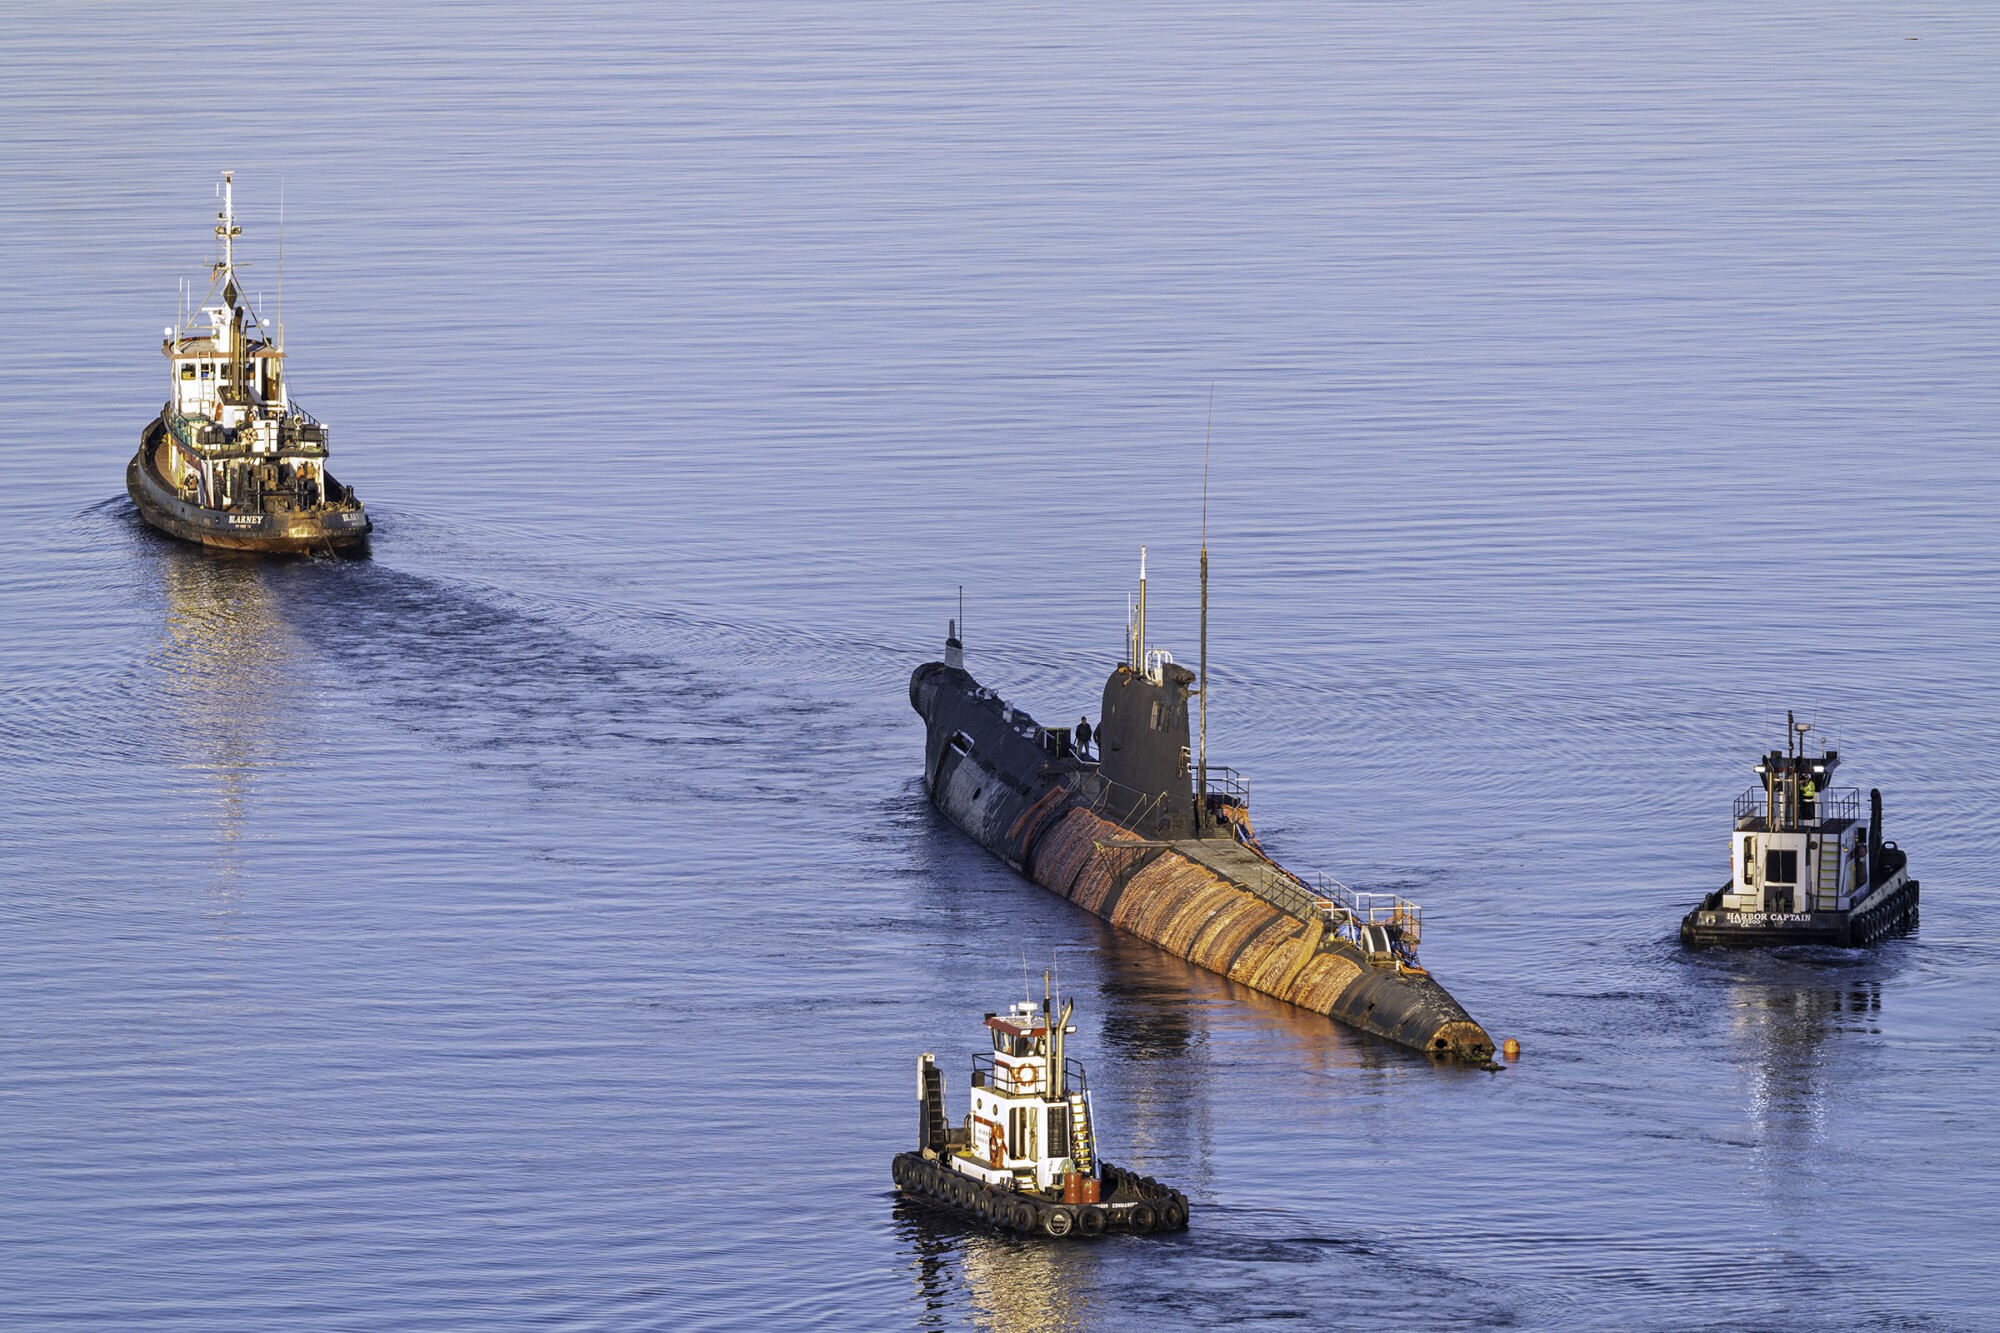 The Soviet submarine B-39 was towed out of San Diego Sunday.